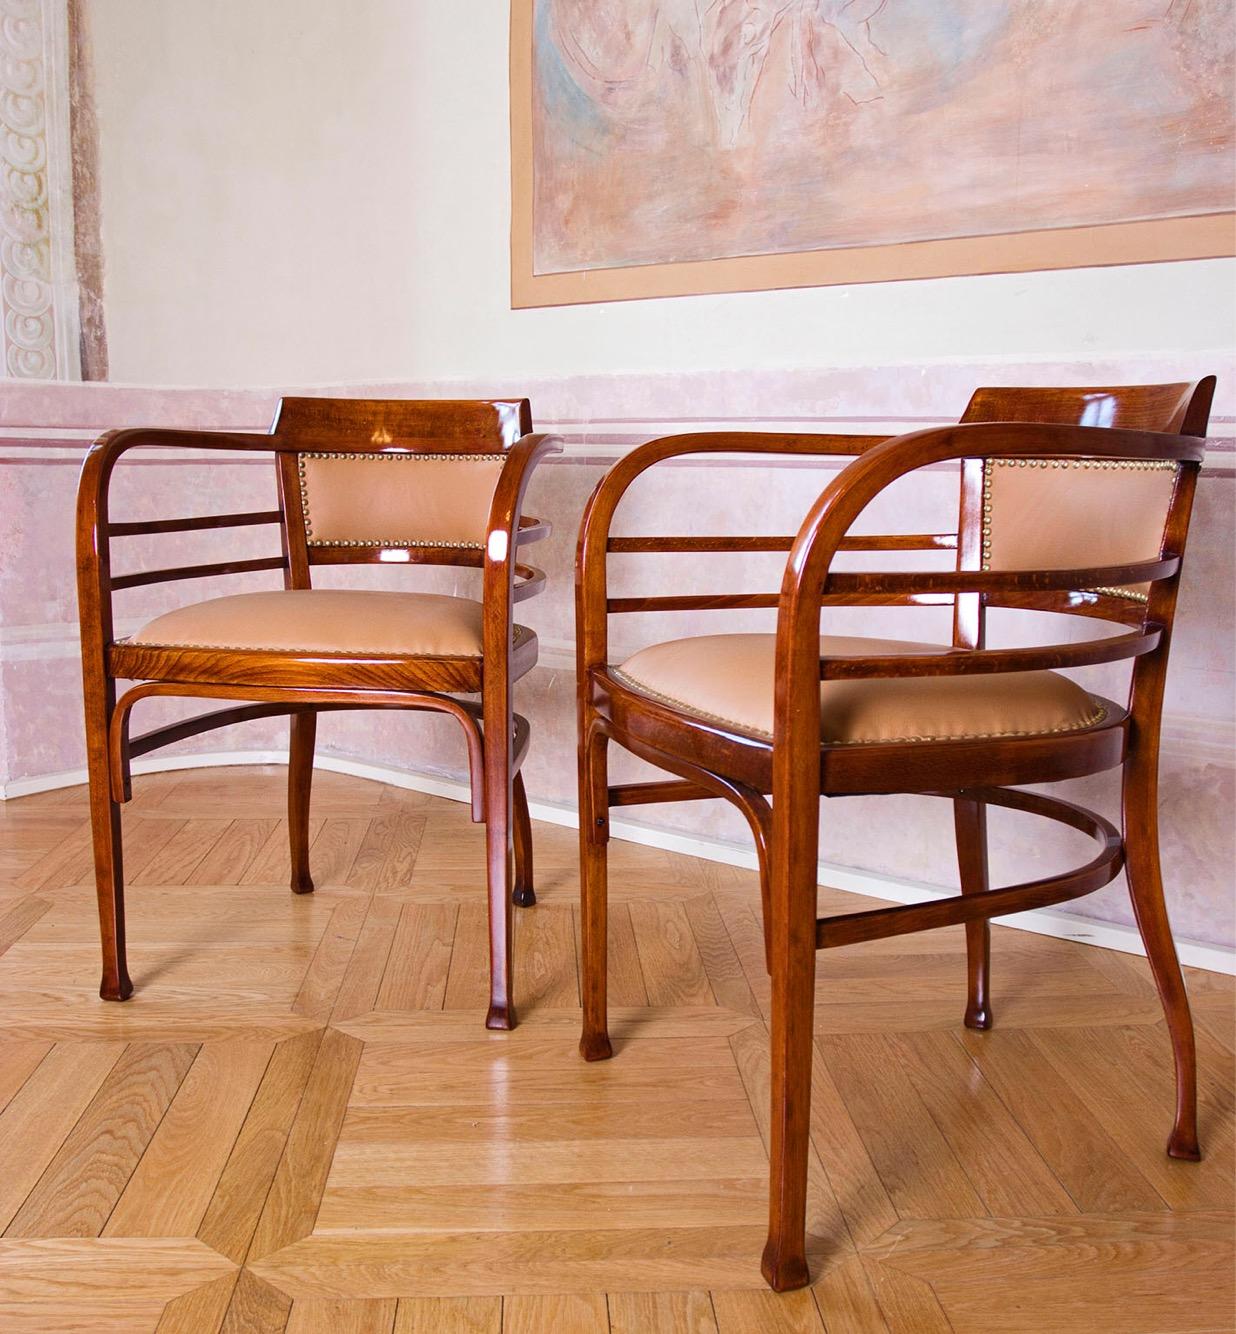 Austrian Wien Secession Thonet Coffee Set Attributed to Otto Wagner Designer For Sale